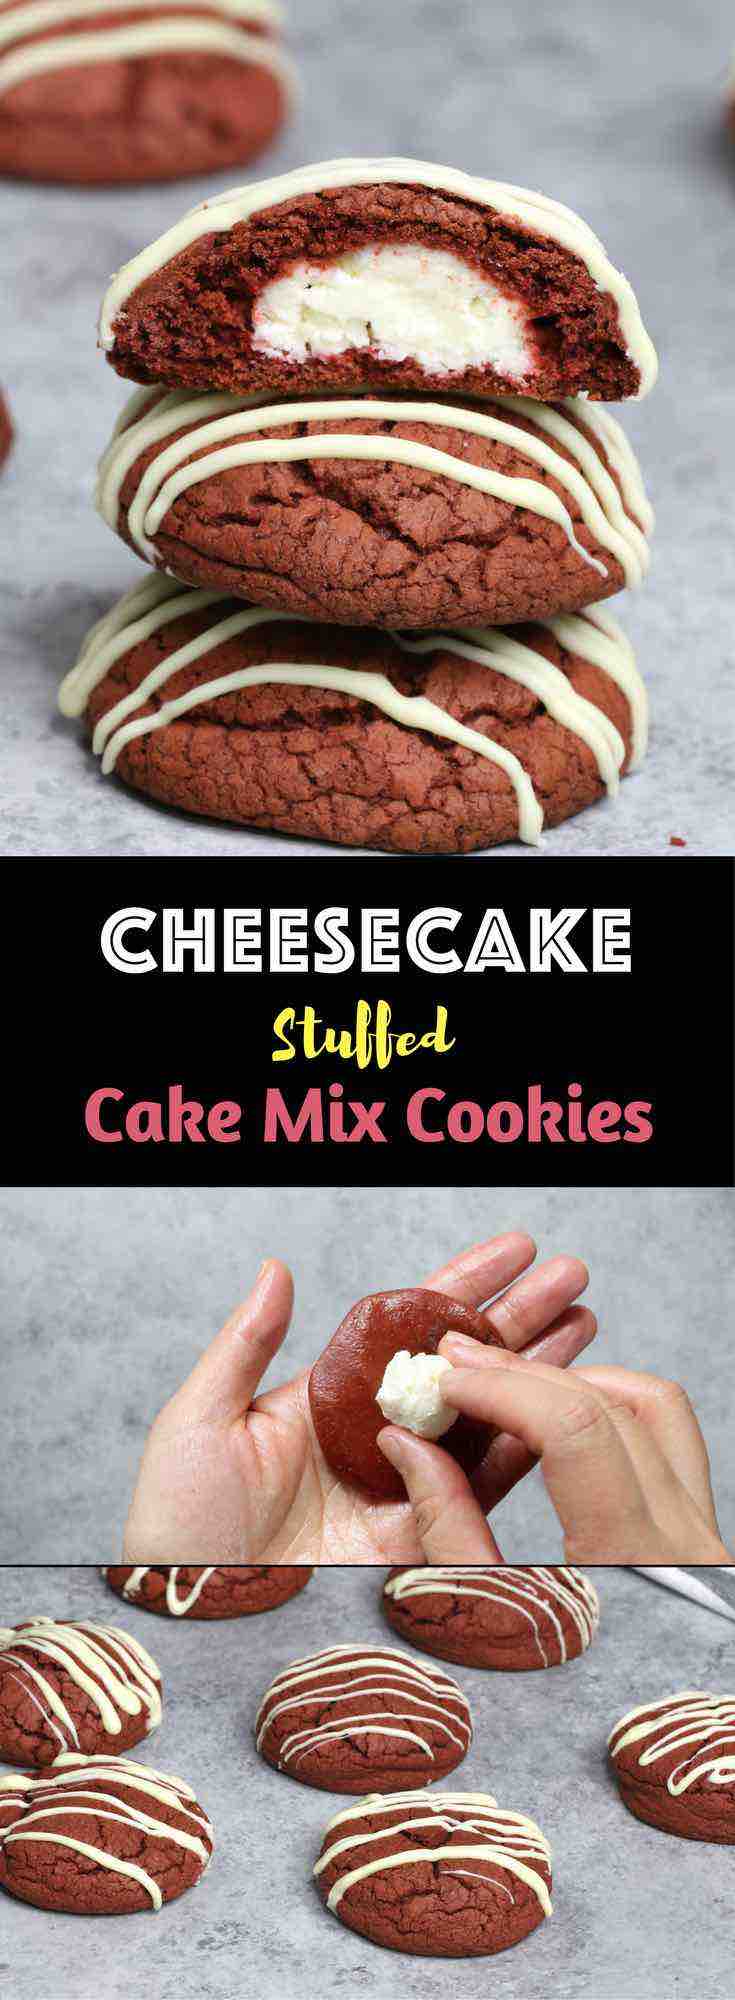 Easy Cheesecake Stuffed Cake Mix Cookies - Soft and chewy delicious cookies are made of red velvet cake mix! Cheesecake is stuffed in these cookies and you will have all your favorite flavors in bite! All you need is a few simple ingredients: Red Velvet cake mix, cream cheese, white chocolate, powdered sugar, flour, egg and oil! So Good! Home made gift recipes. Mother’s Day recipe. Vegetarian. Video recipe. 